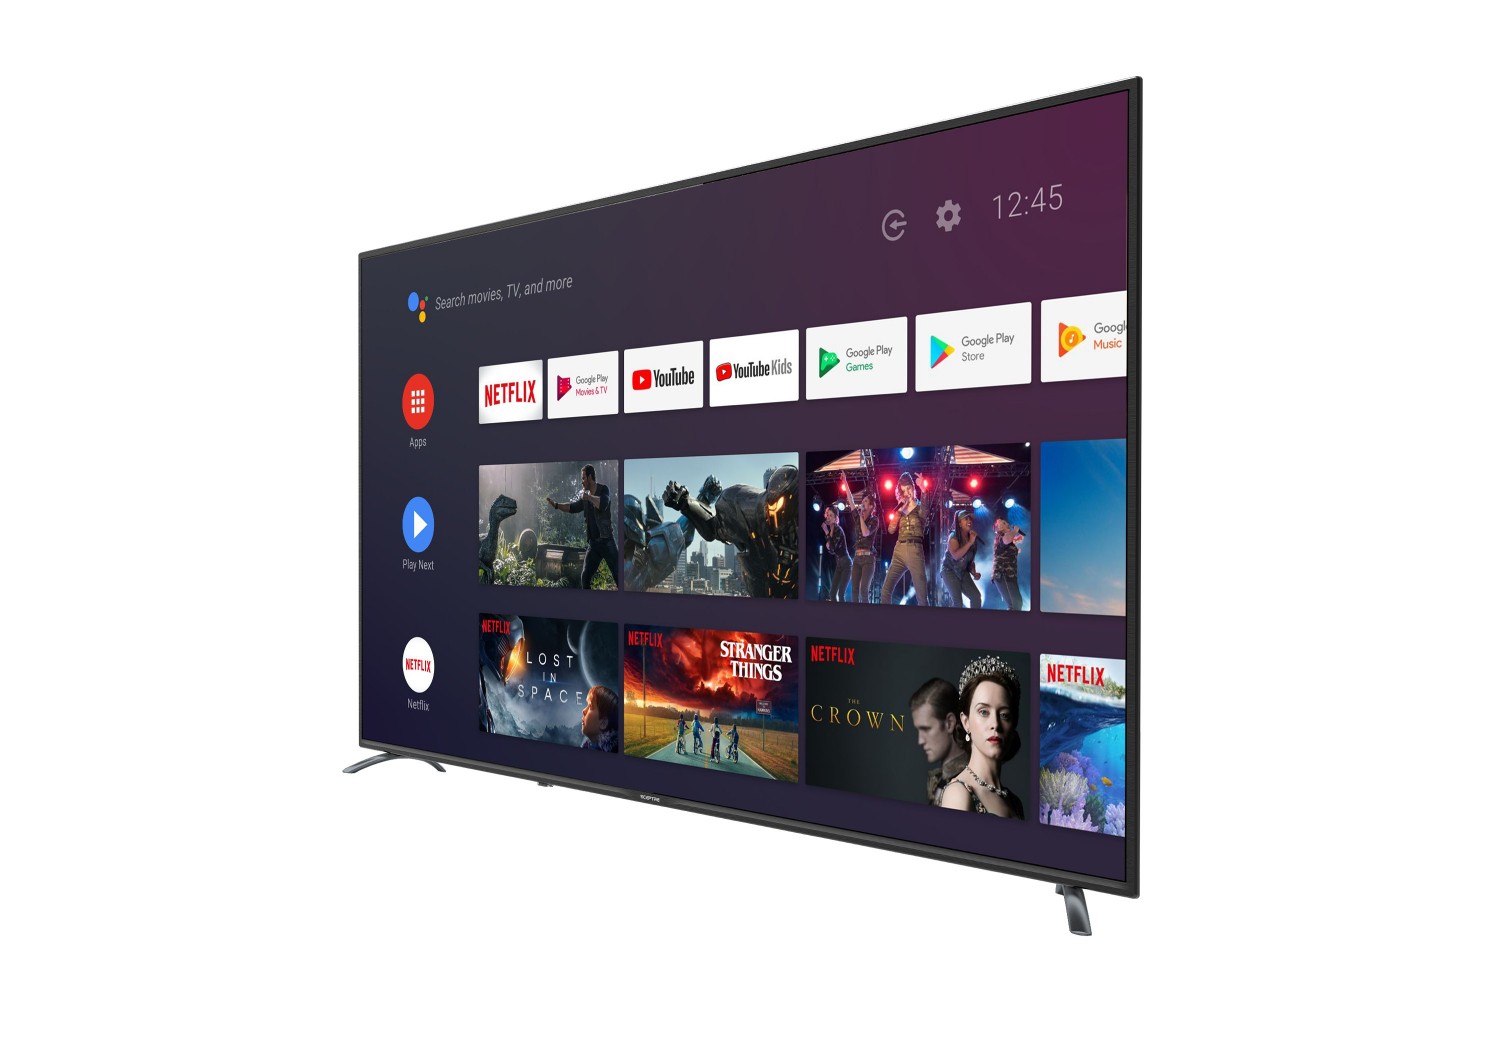 Sceptre 65" Class TV (2160p) Android Smart 4K LED TV with Google Assistant (A658CV-U) - image 3 of 5